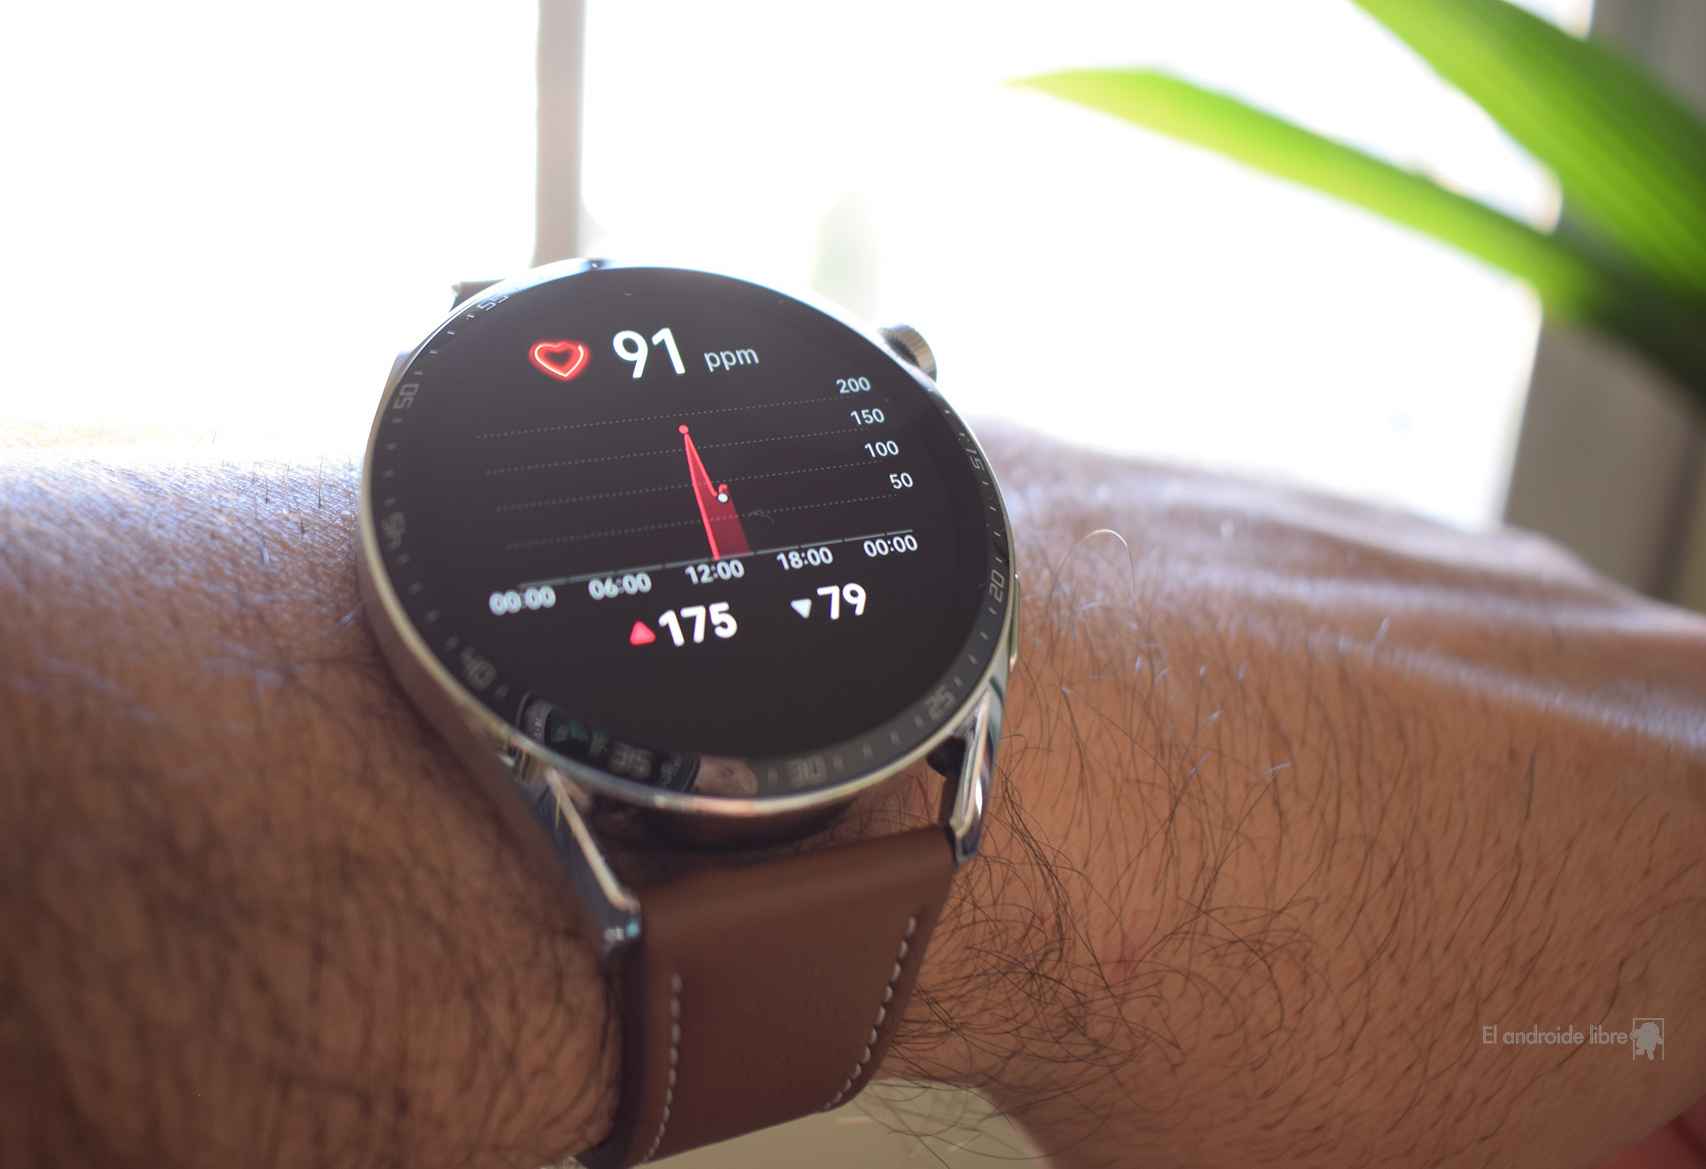 The Huawei Watch GT 3 placed on the wrist of the hand